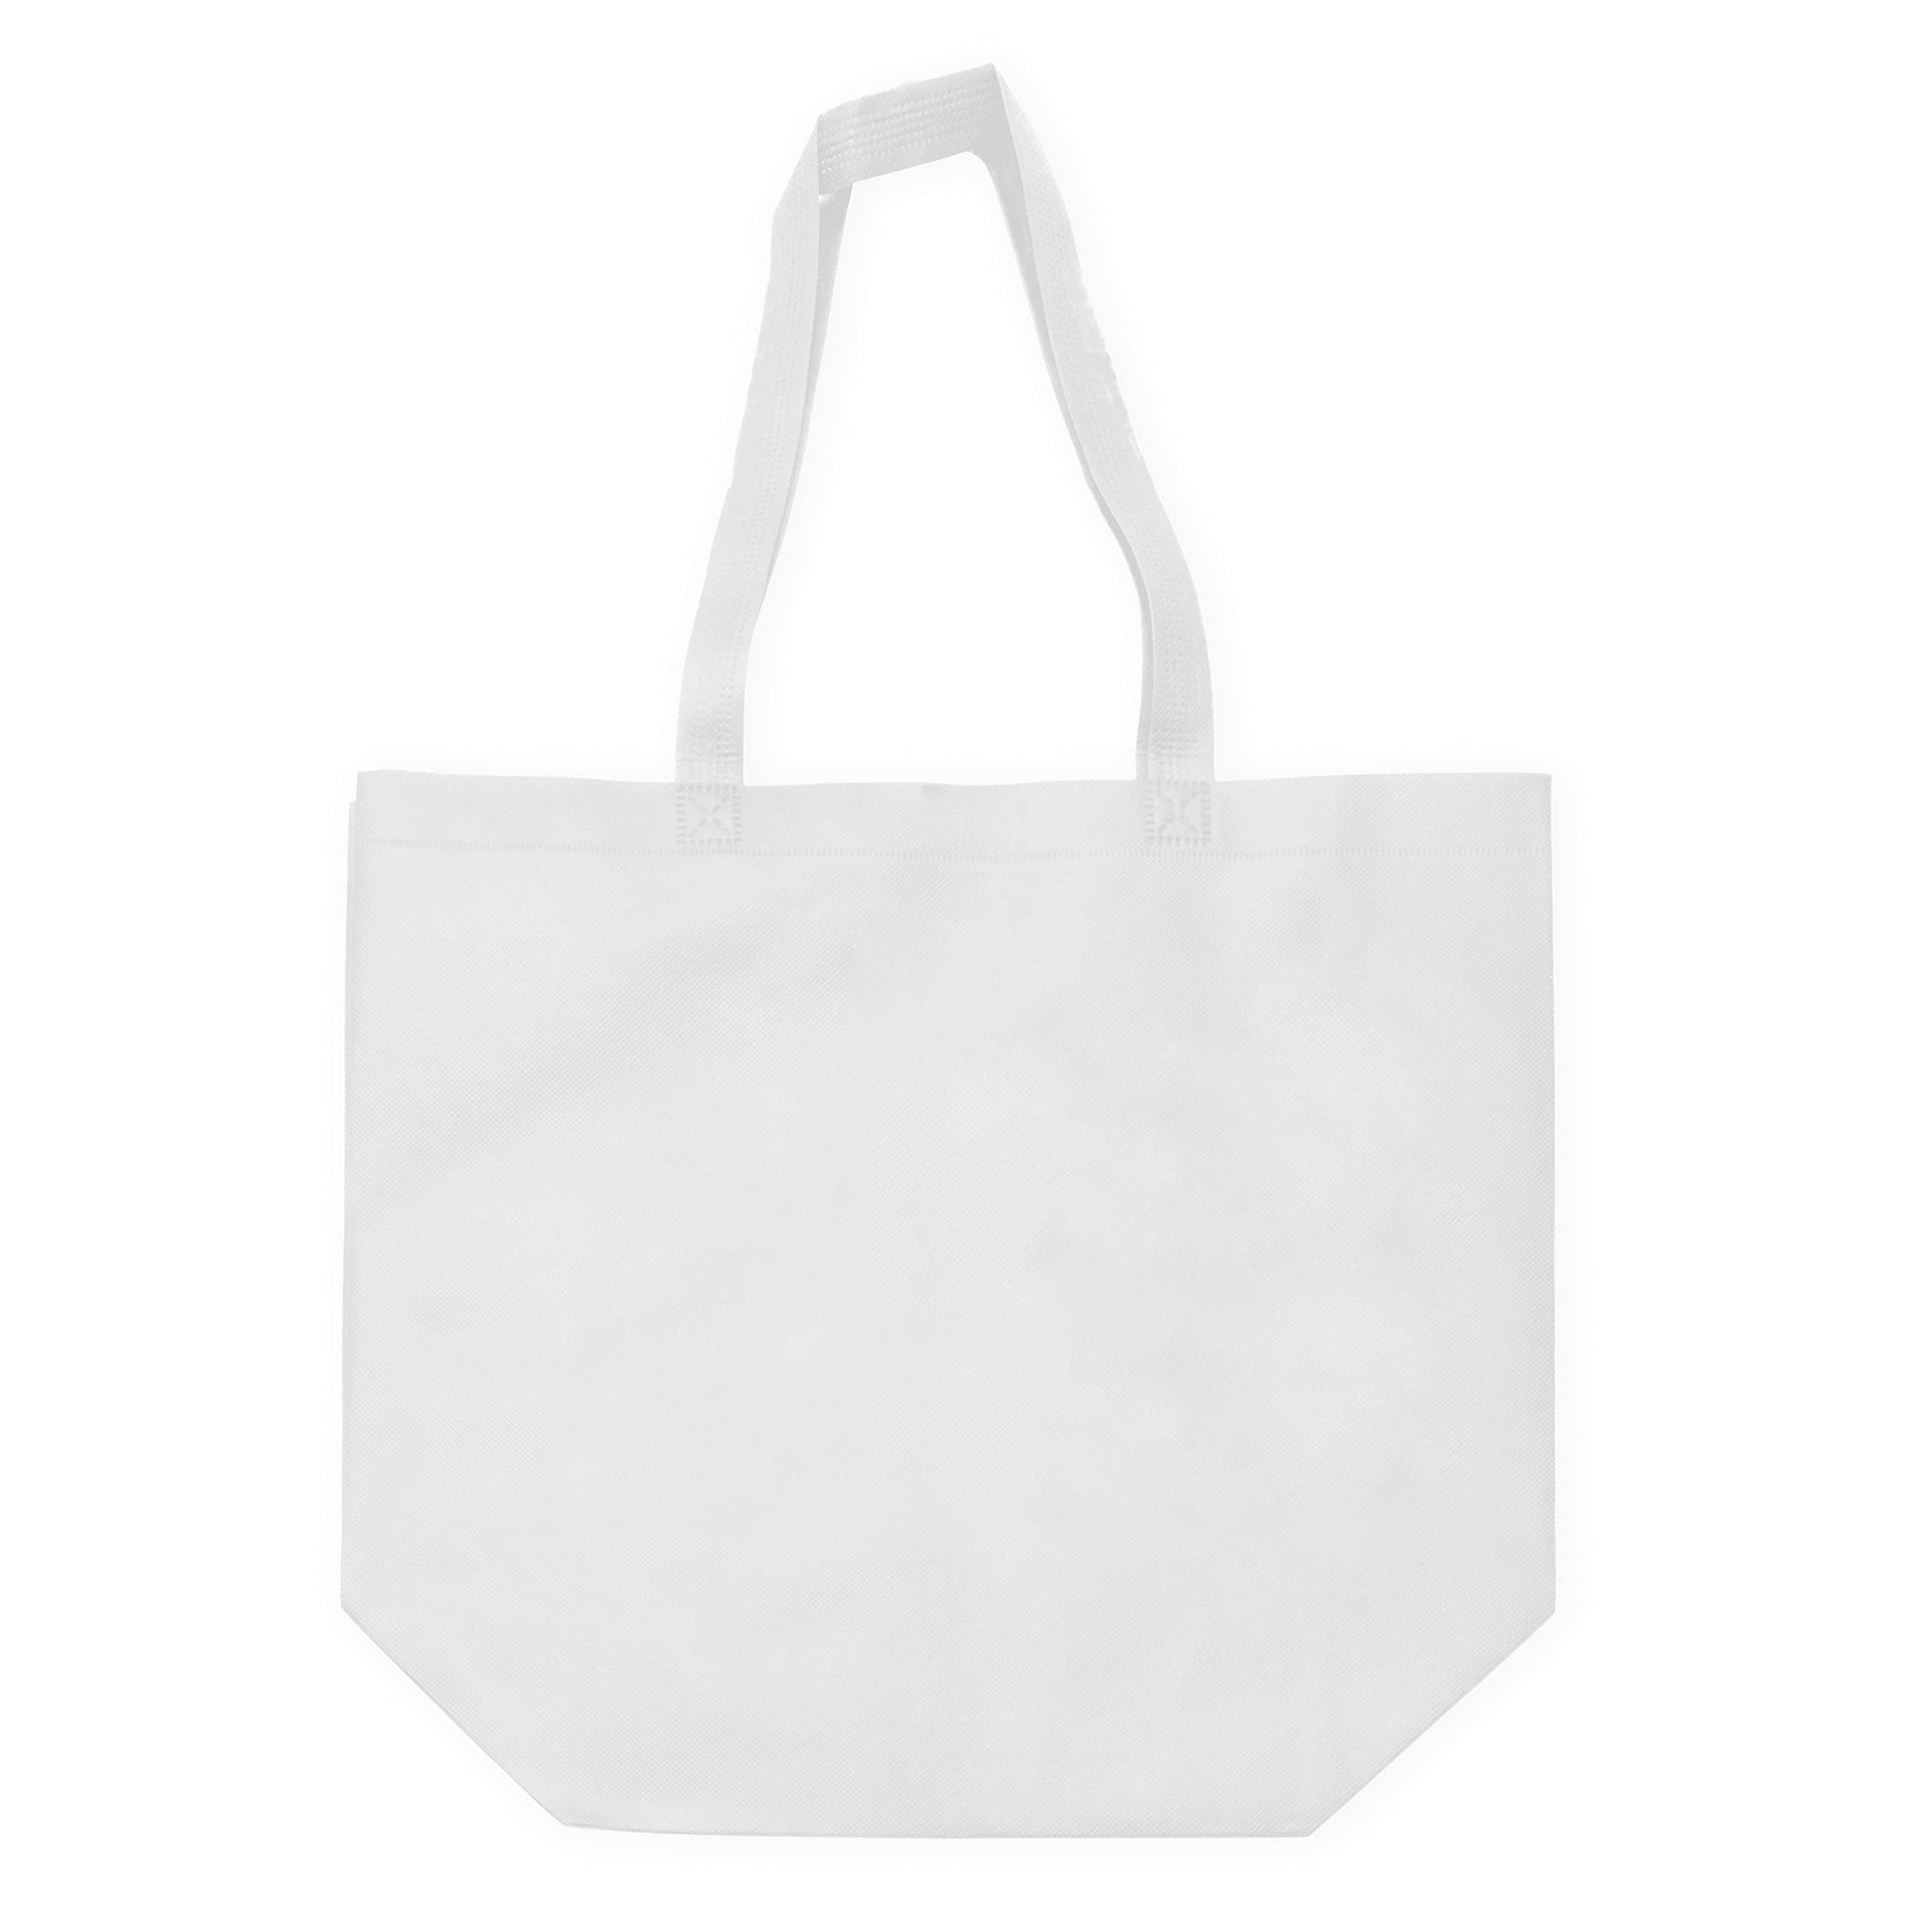 Eco-Friendly Reusable Gift Bags - 12 Pack Large Totes for Shopping & Events - White Cloth with Handles, Size 16x6x12